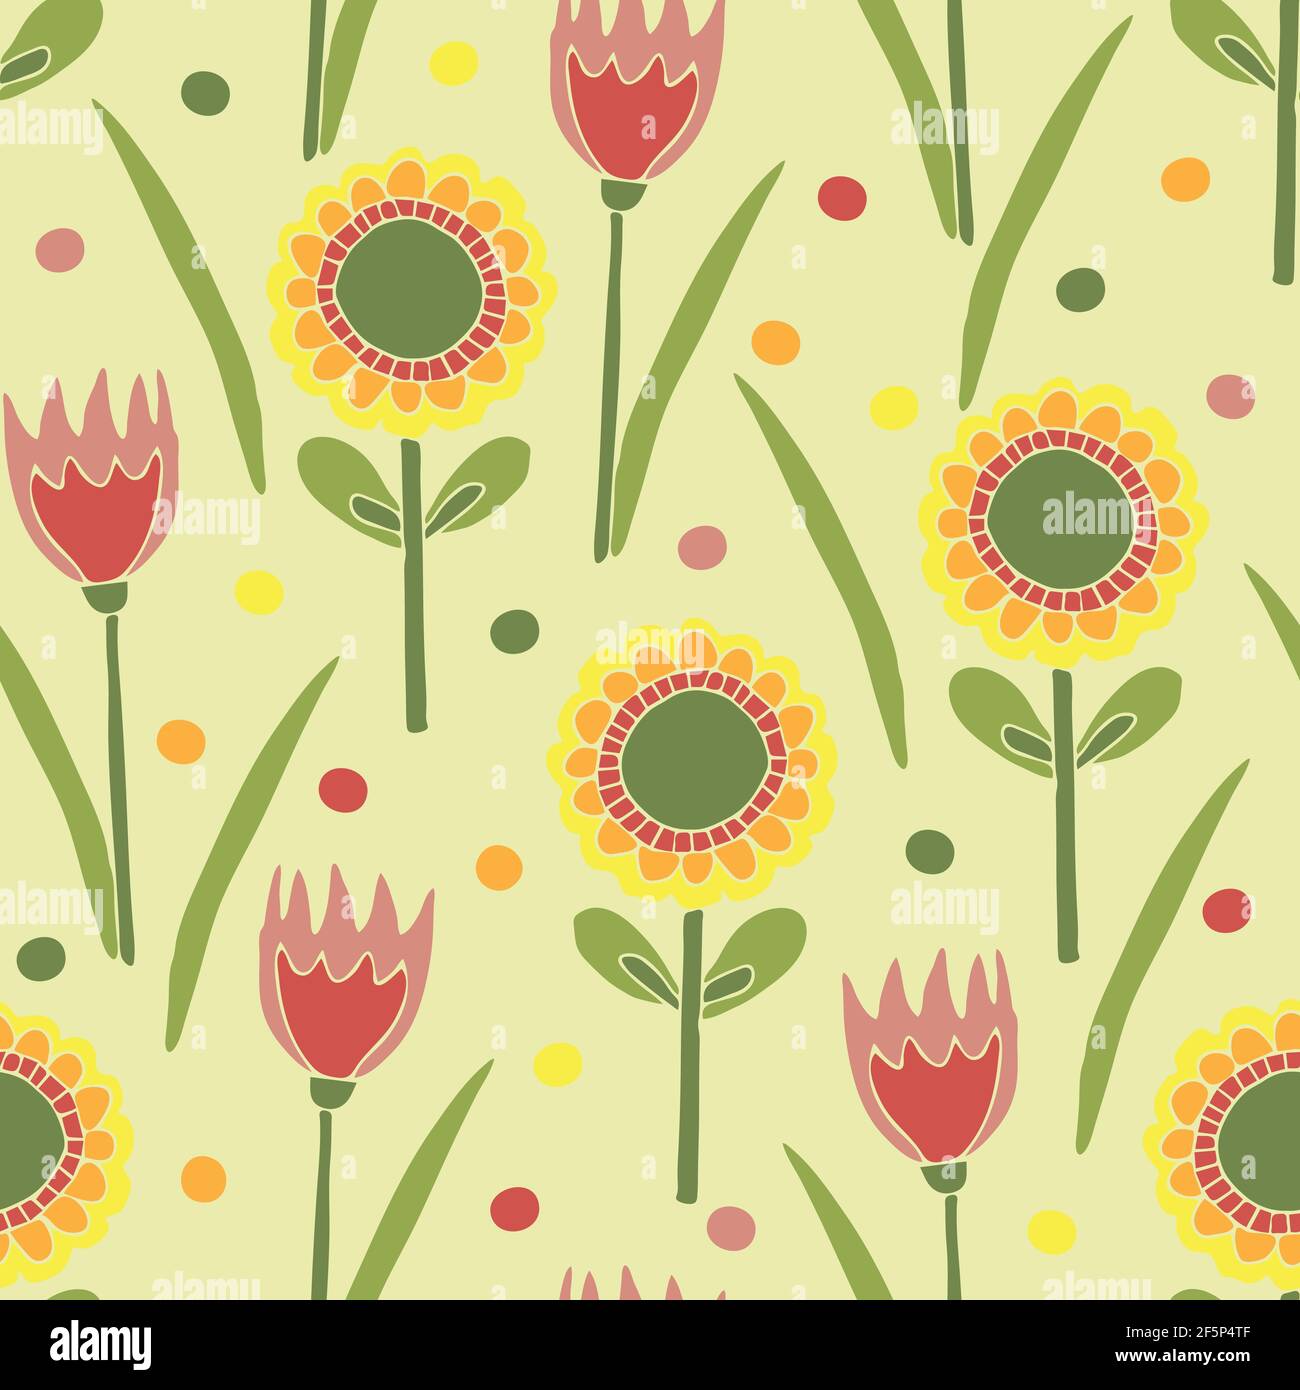 Download Vibrant Summer Blooms in a Field Wallpaper | Wallpapers.com